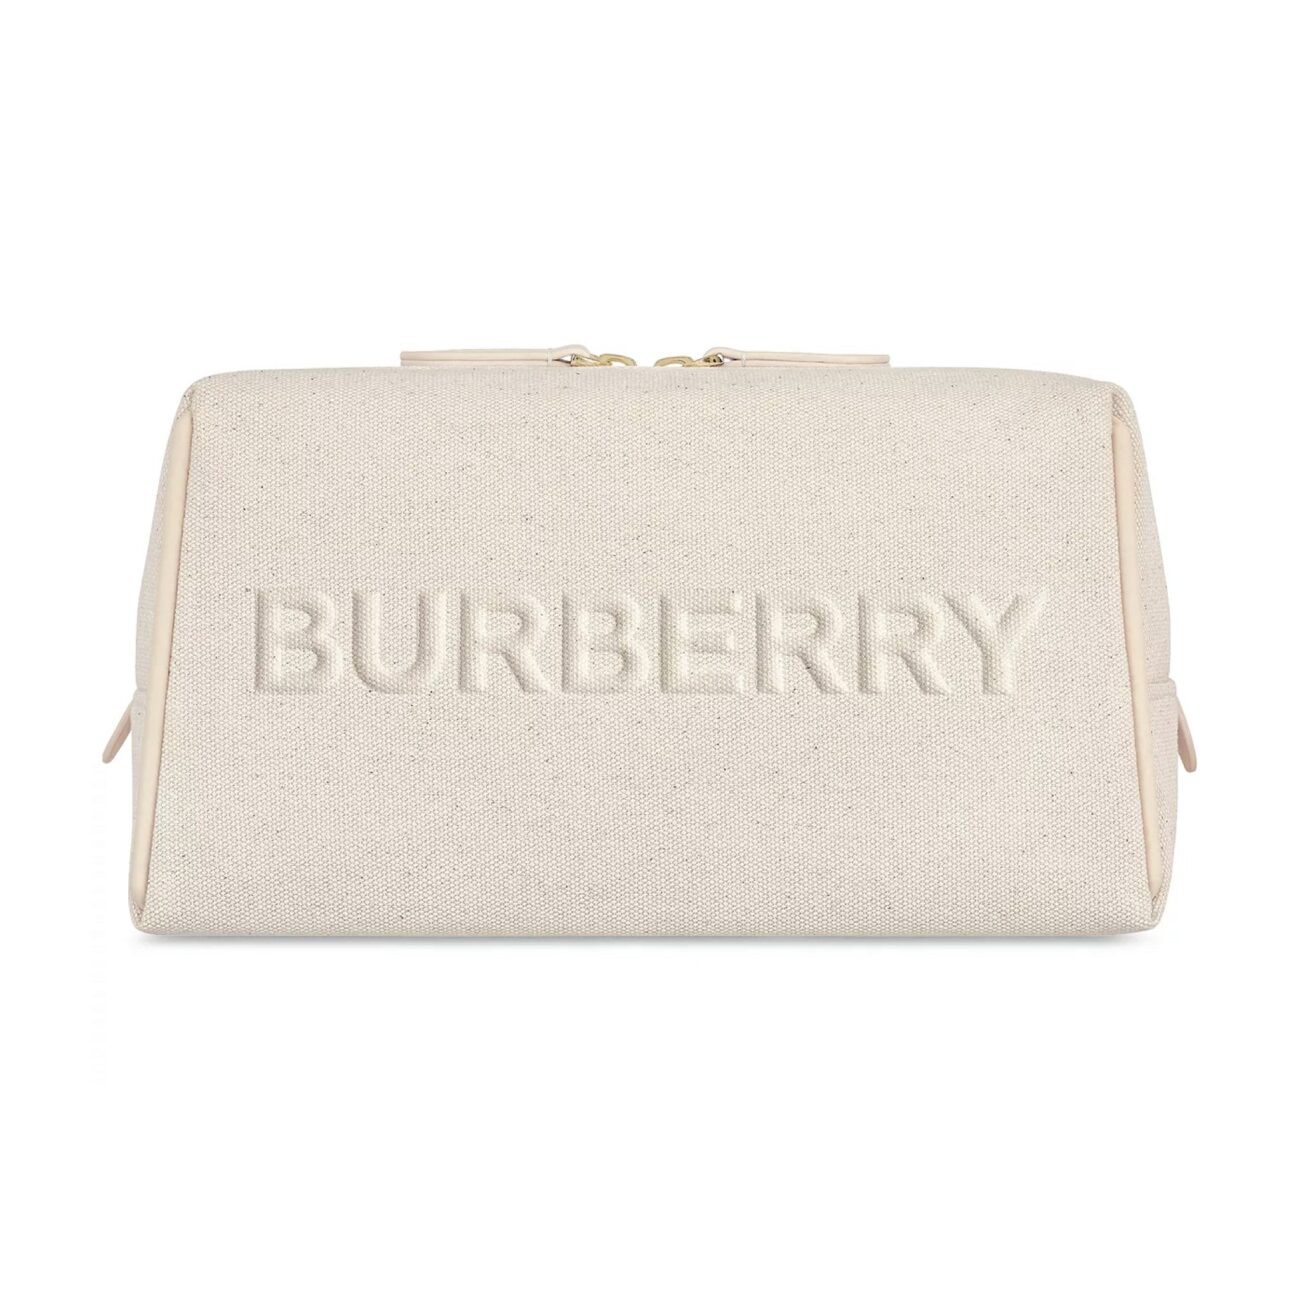 Pouch-Burberry